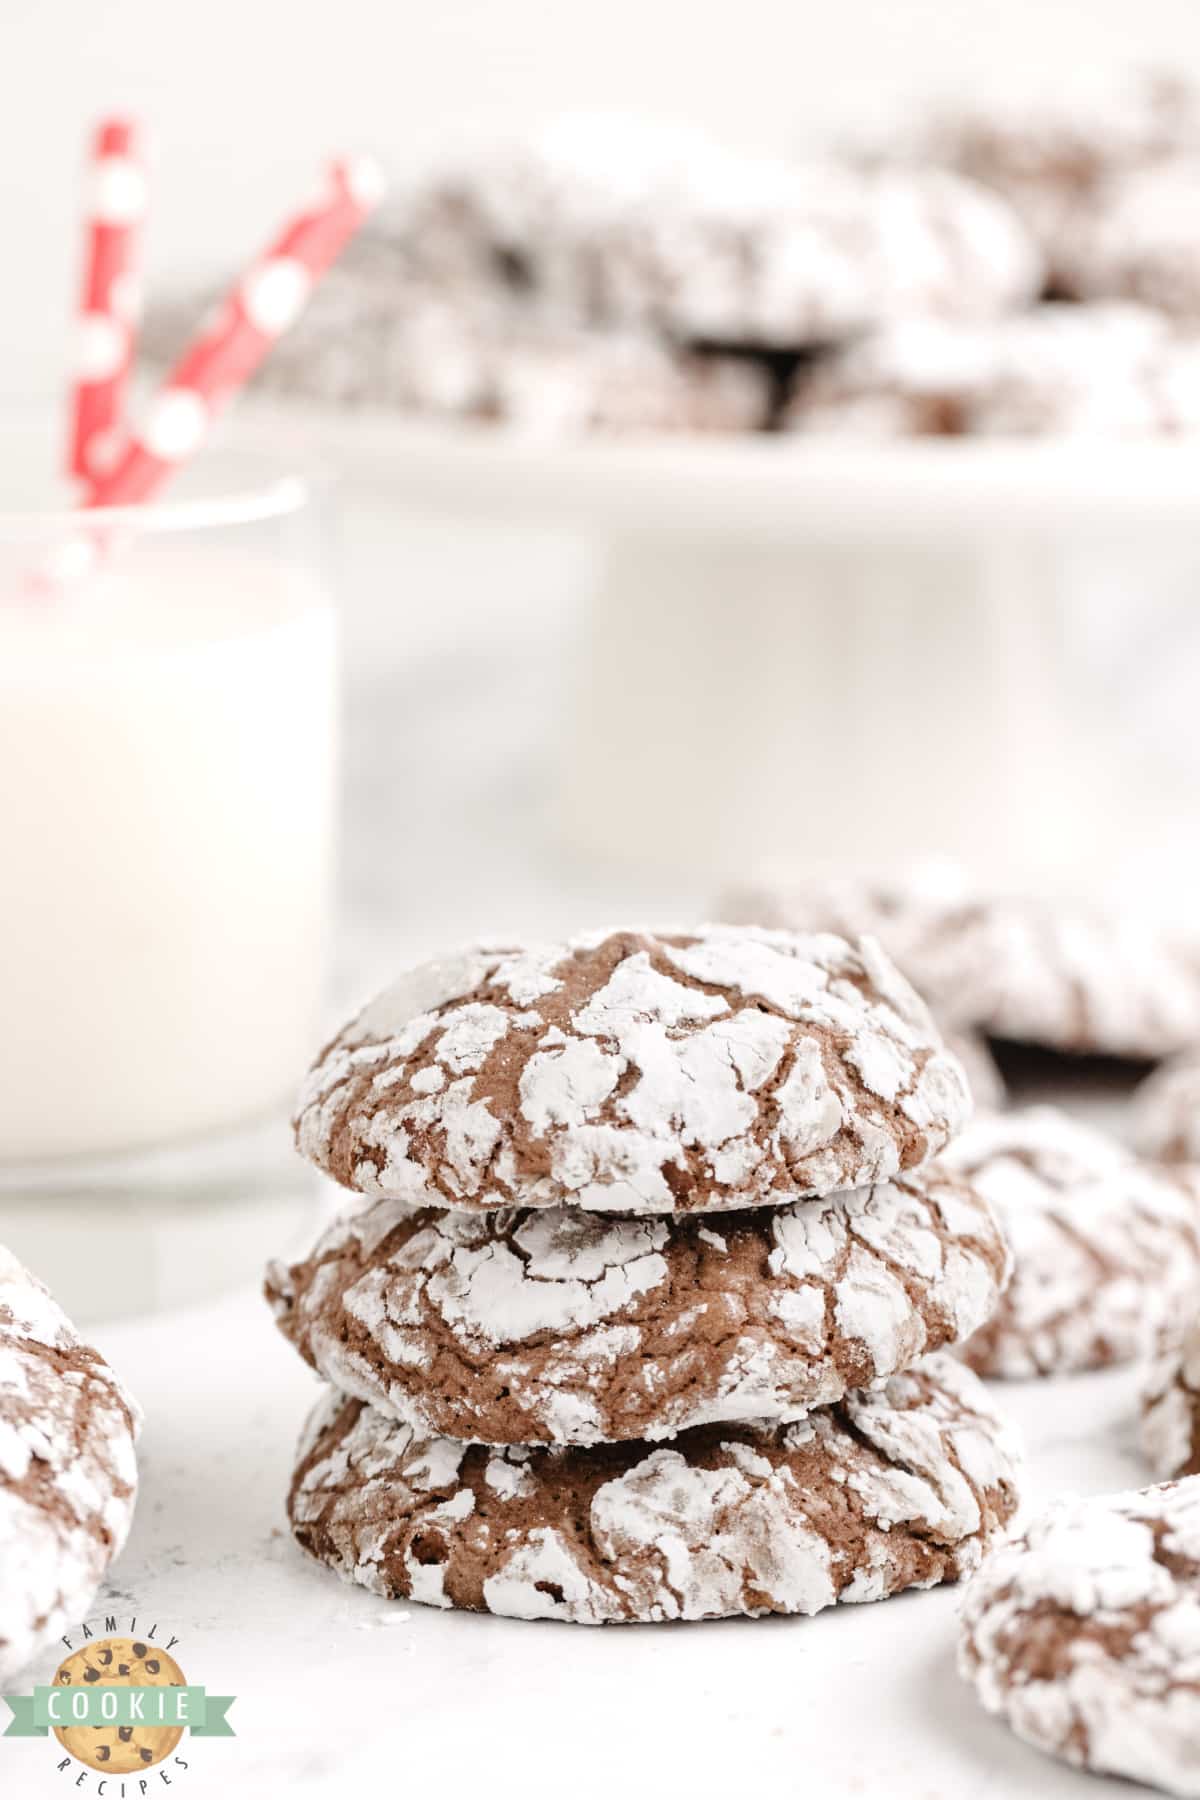 Brownie Crinkle Cookies are rich, fudgy cookies that are rolled in powdered sugar. Made with a brownie mix, this delicious brownie cookie recipe is so easy to make! 